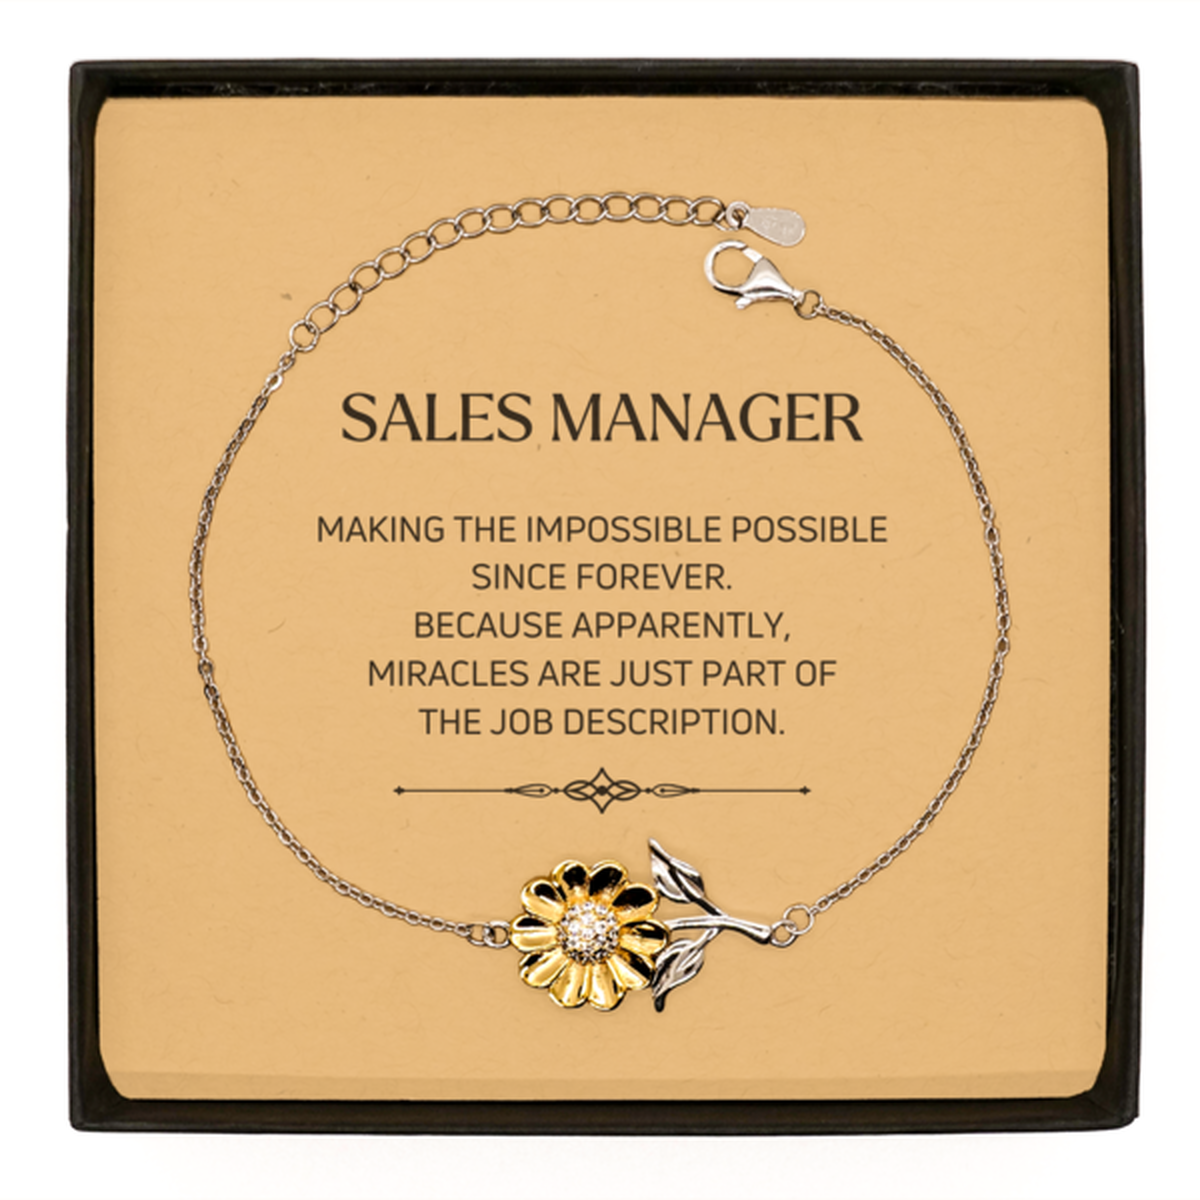 Funny Sales Manager Gifts, Miracles are just part of the job description, Inspirational Birthday Sunflower Bracelet For Sales Manager, Men, Women, Coworkers, Friends, Boss